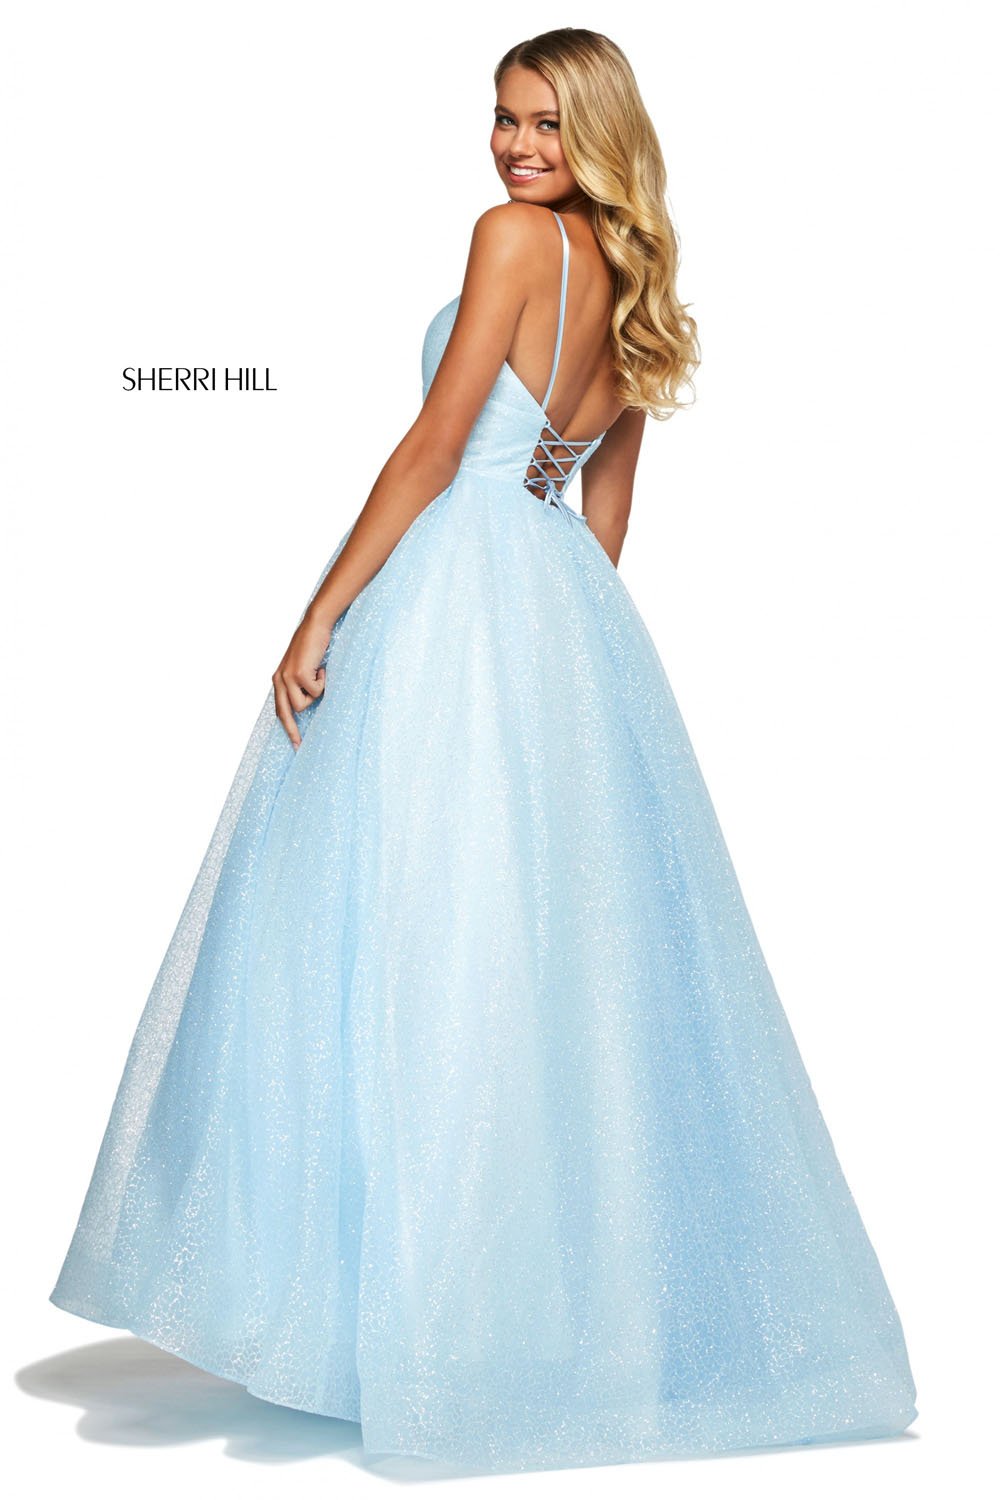 Sherri Hill 53665 dress images in these colors: White, Light Pink, Light Blue.